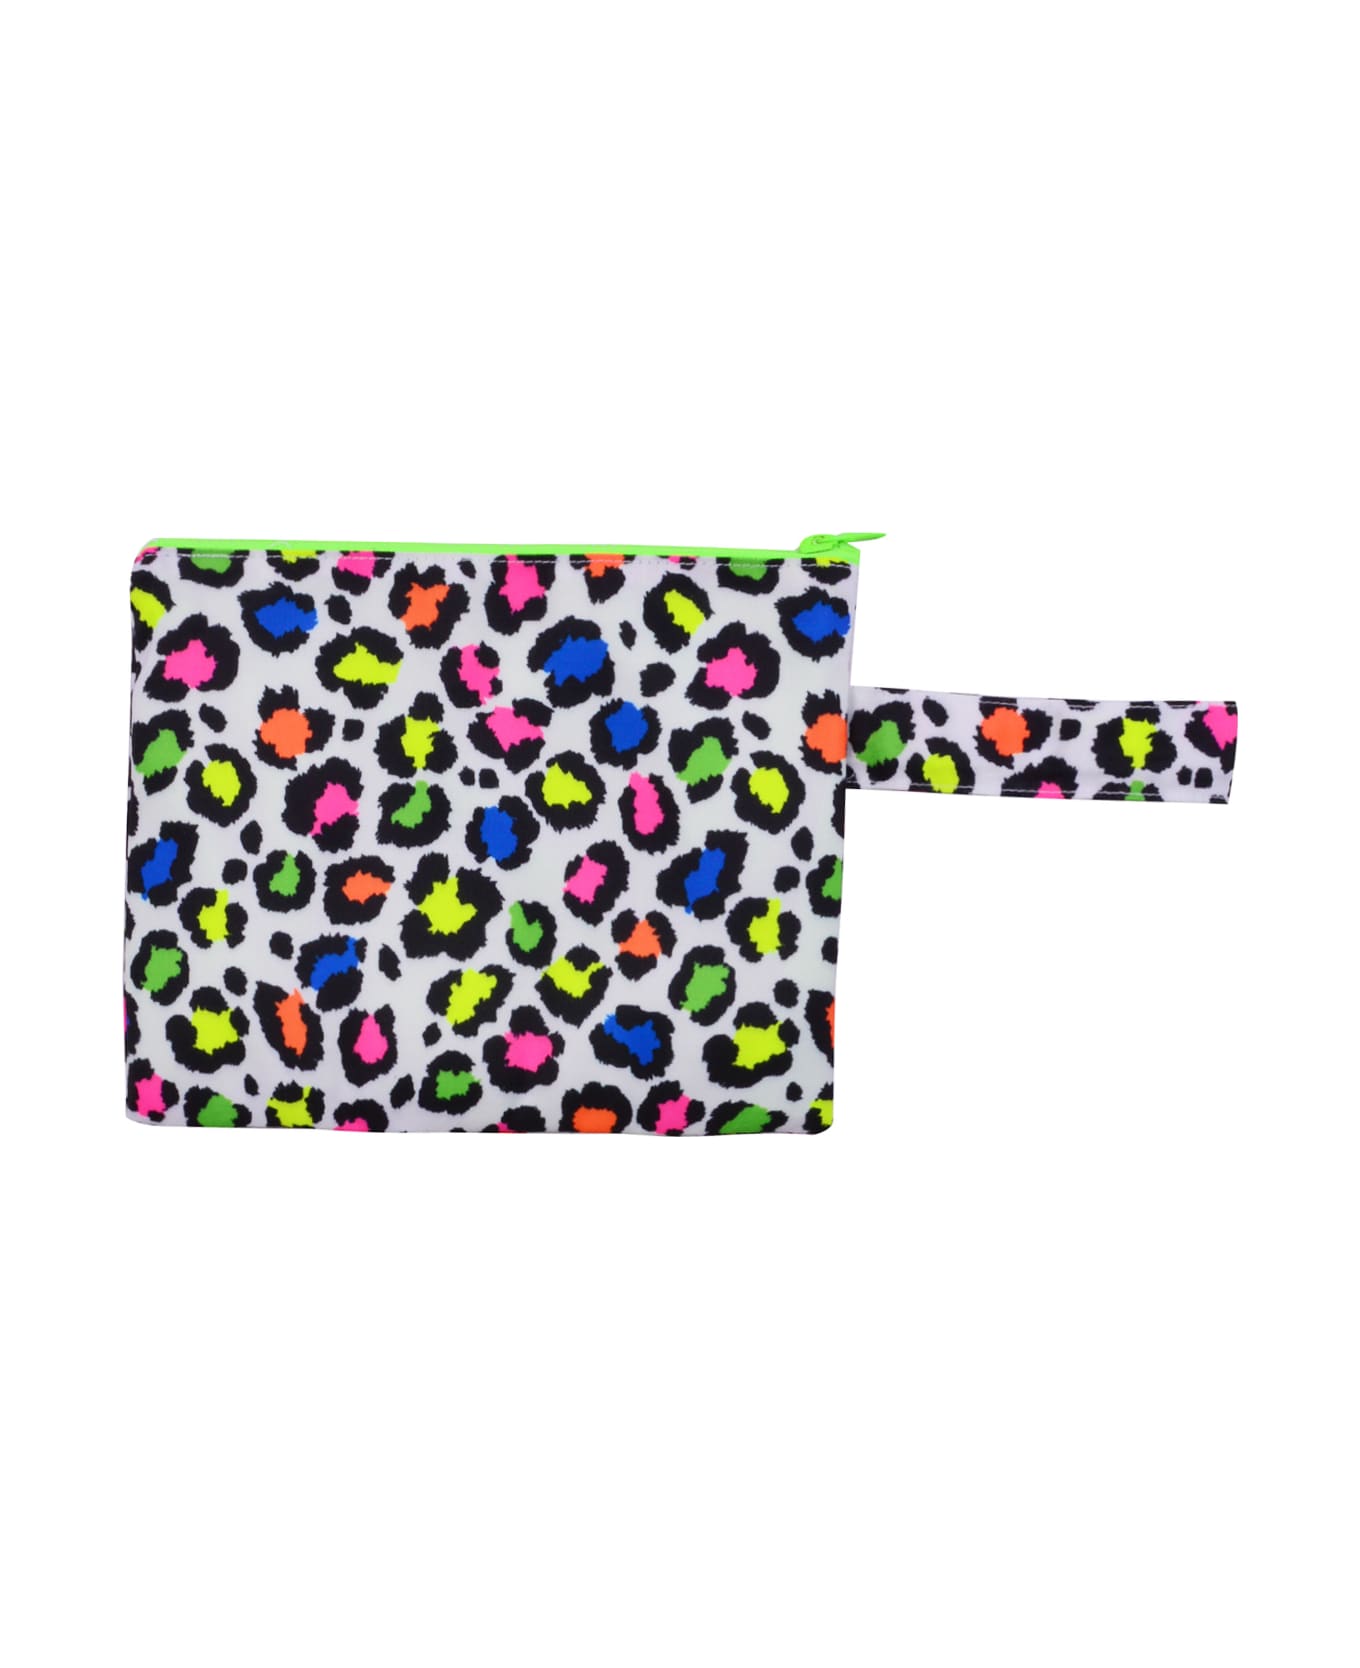 MC2 Saint Barth Pouch In Fabric With Print - Multicolor アクセサリー＆ギフト